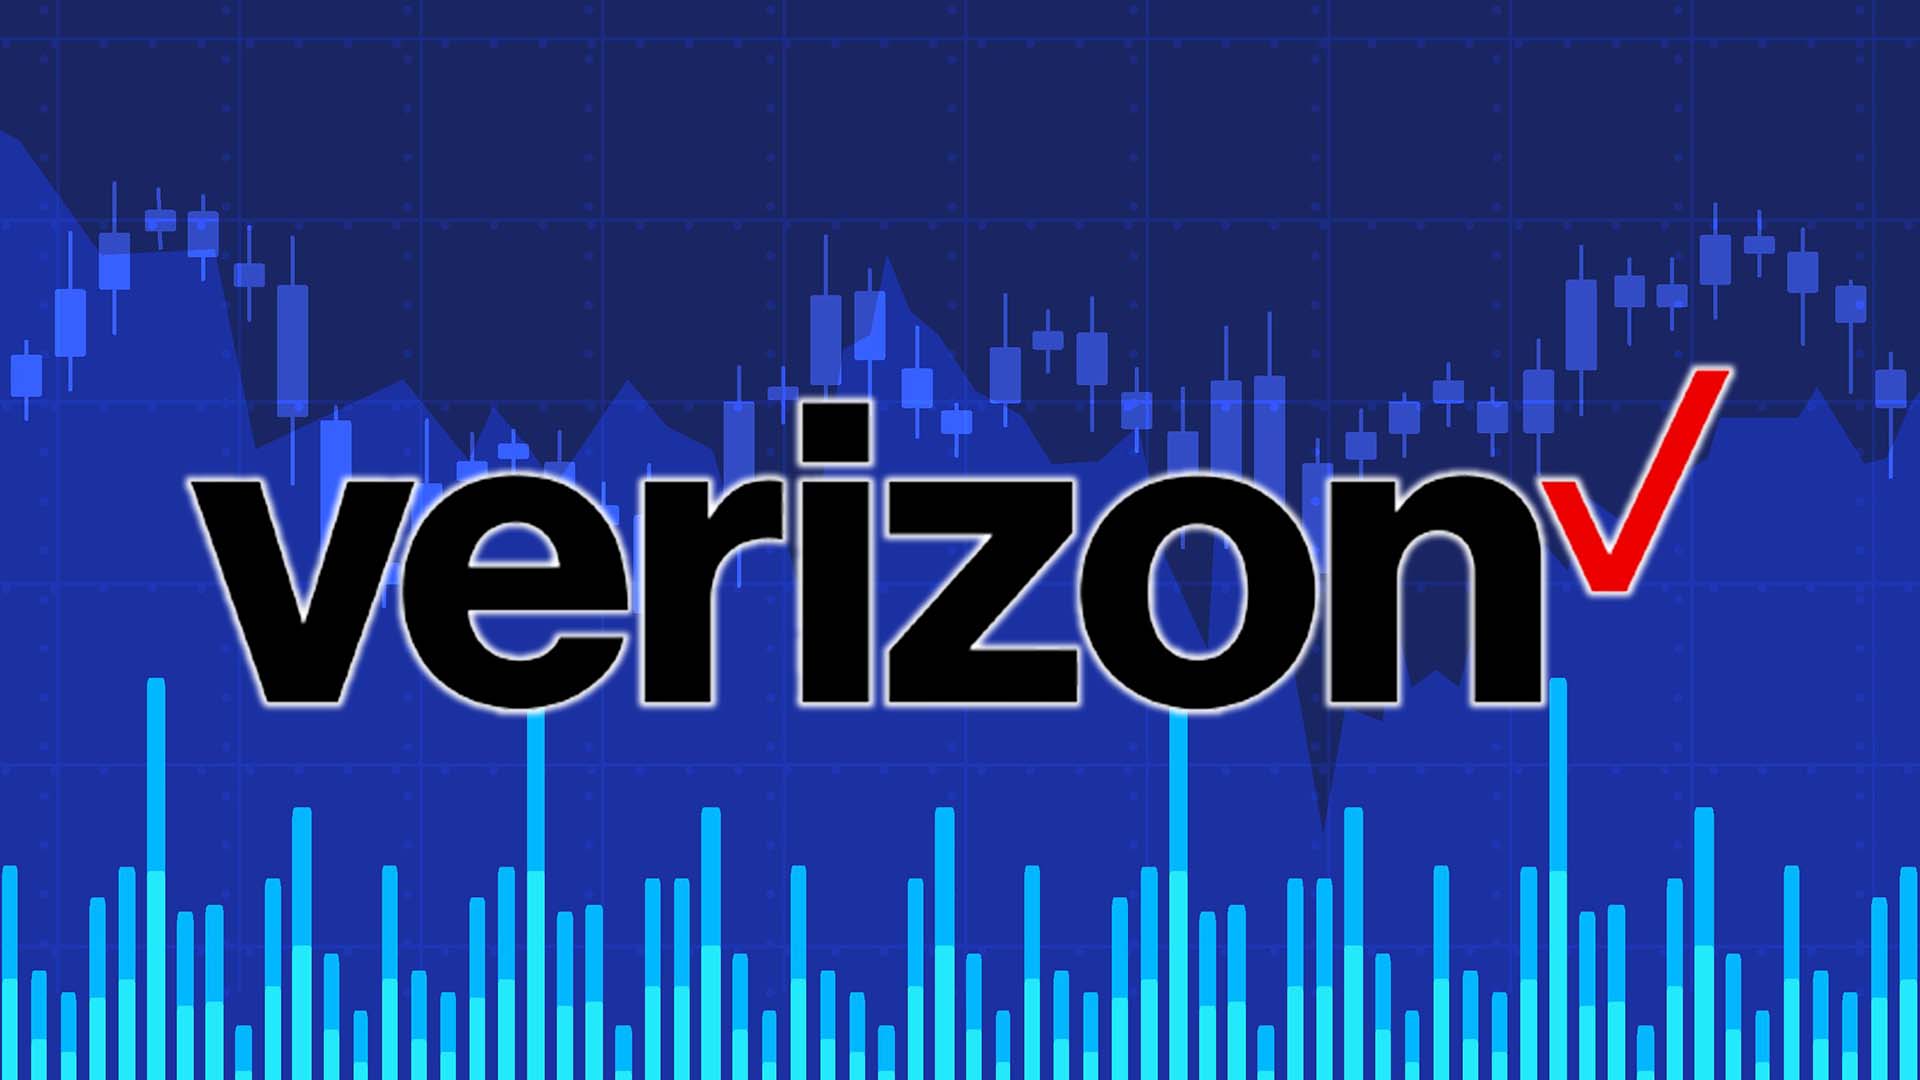 Is Verizon Stock Price Aiming For the $50 Mark?